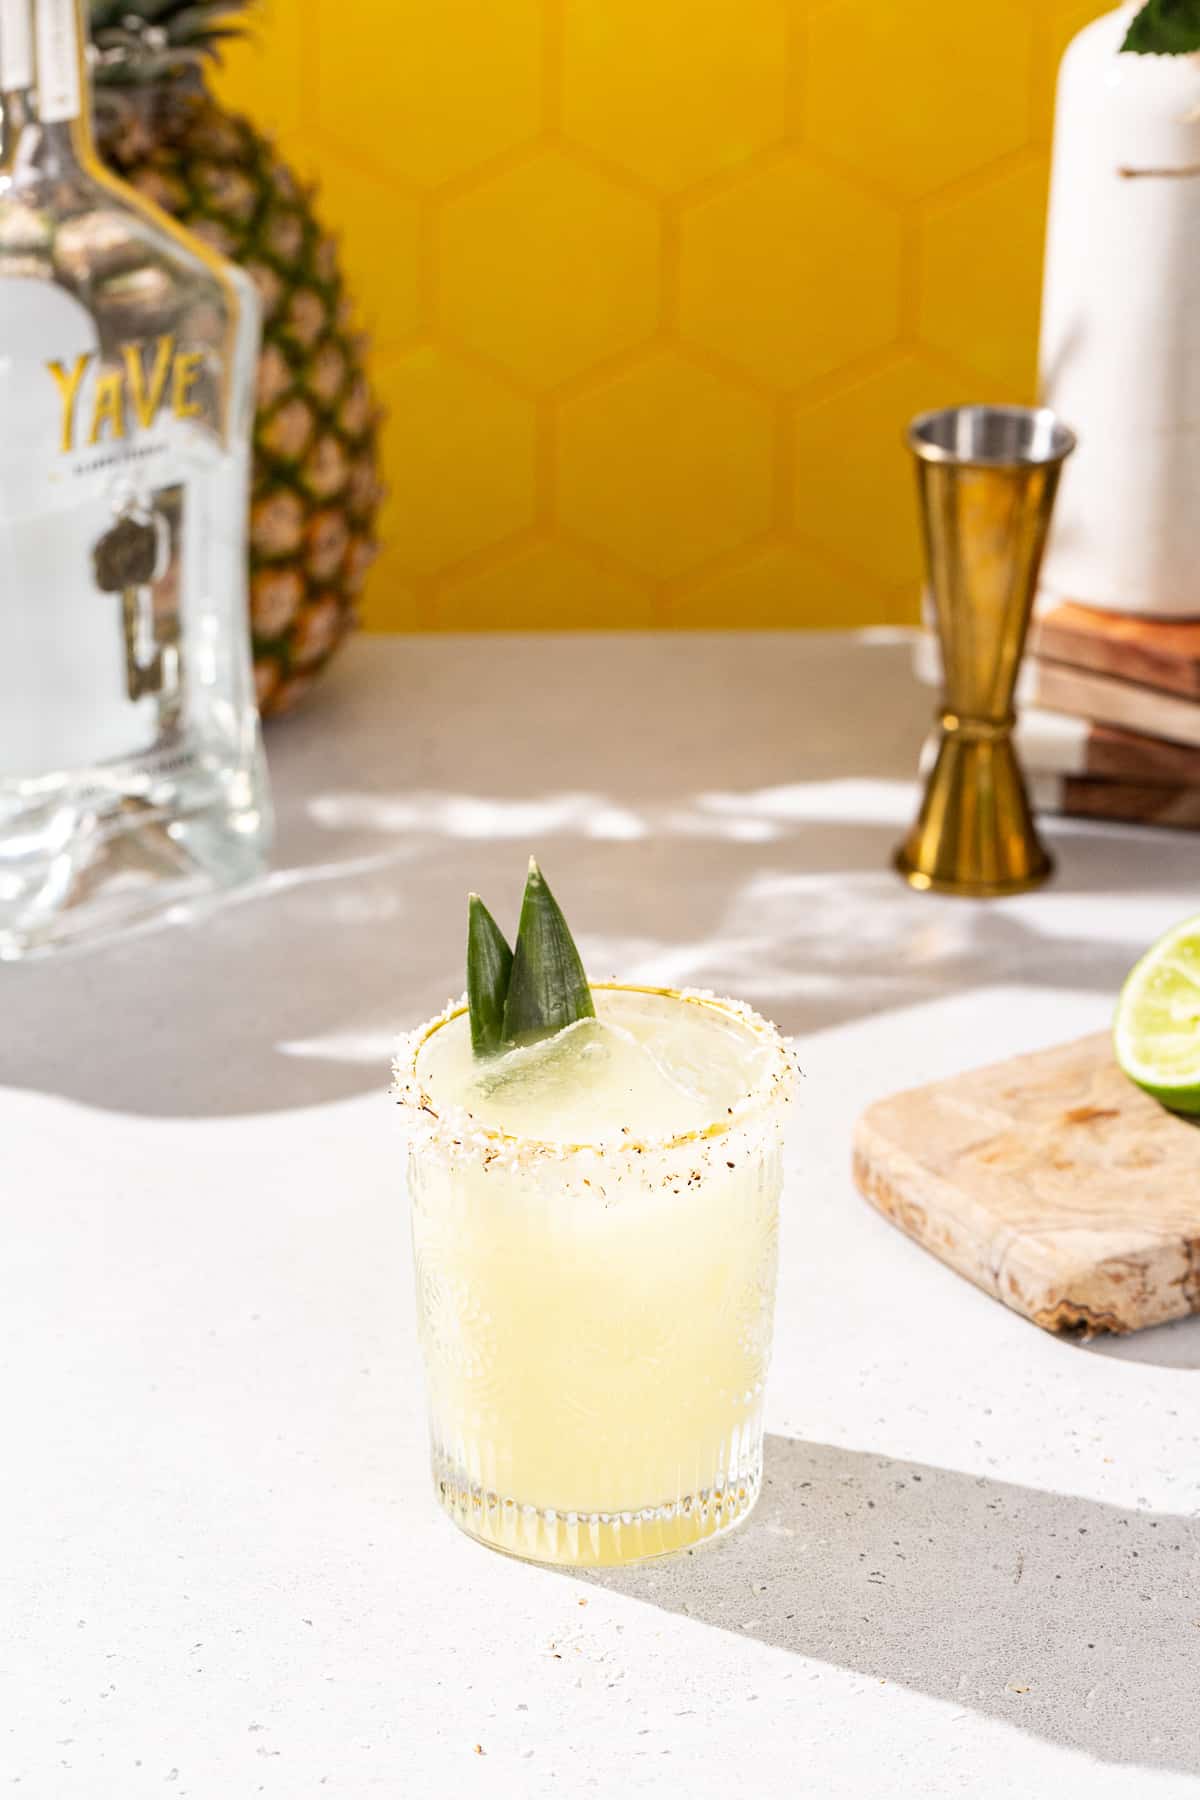 Slightly overhead view of a pineapple coconut margarita cocktail on a countertop. The glass is garnished with a toasted coconut rim and two pineapple fronds. Bar tools and ingredients are in the background.